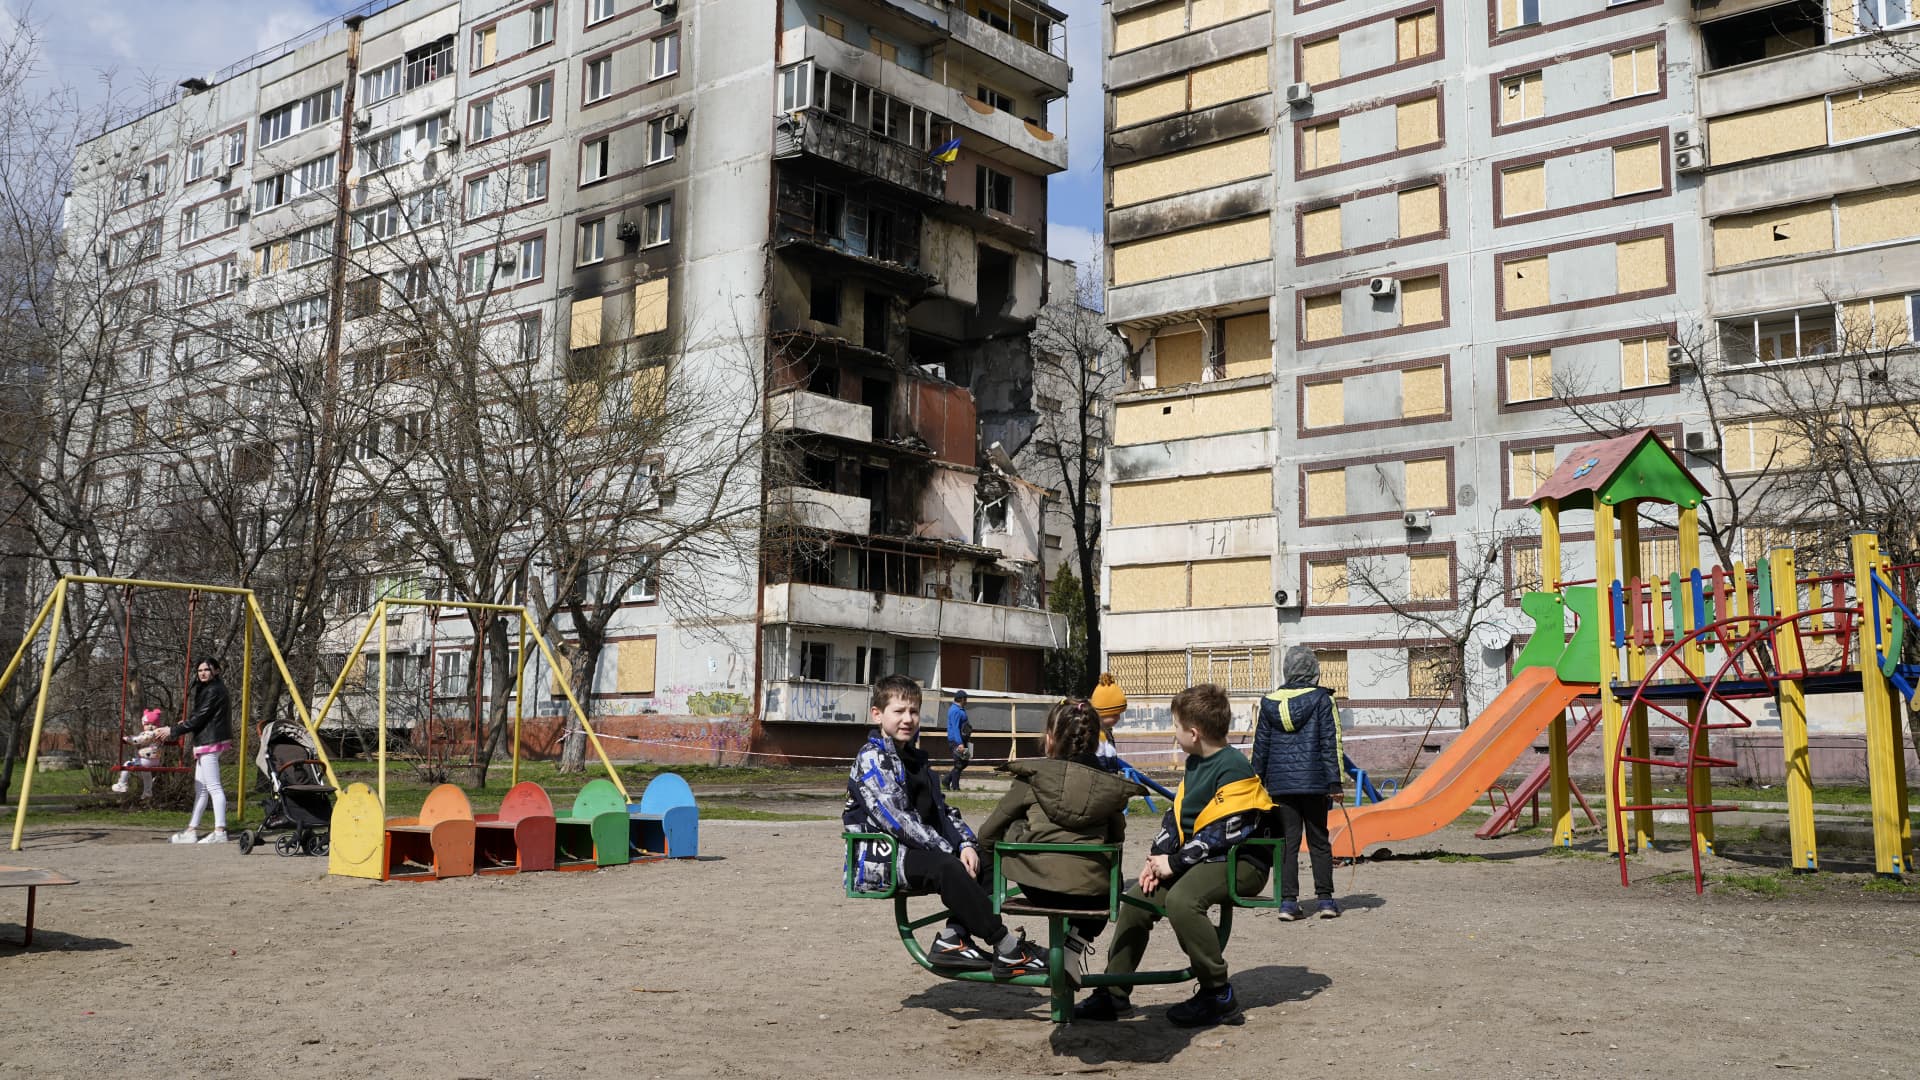 Children play in a playground in front of missile-damaged buildings ahead of a visit by Ukraine's President Volodymyr Zelenskyy Zaporizhzhia, Ukraine, Monday March 27, 2023. 